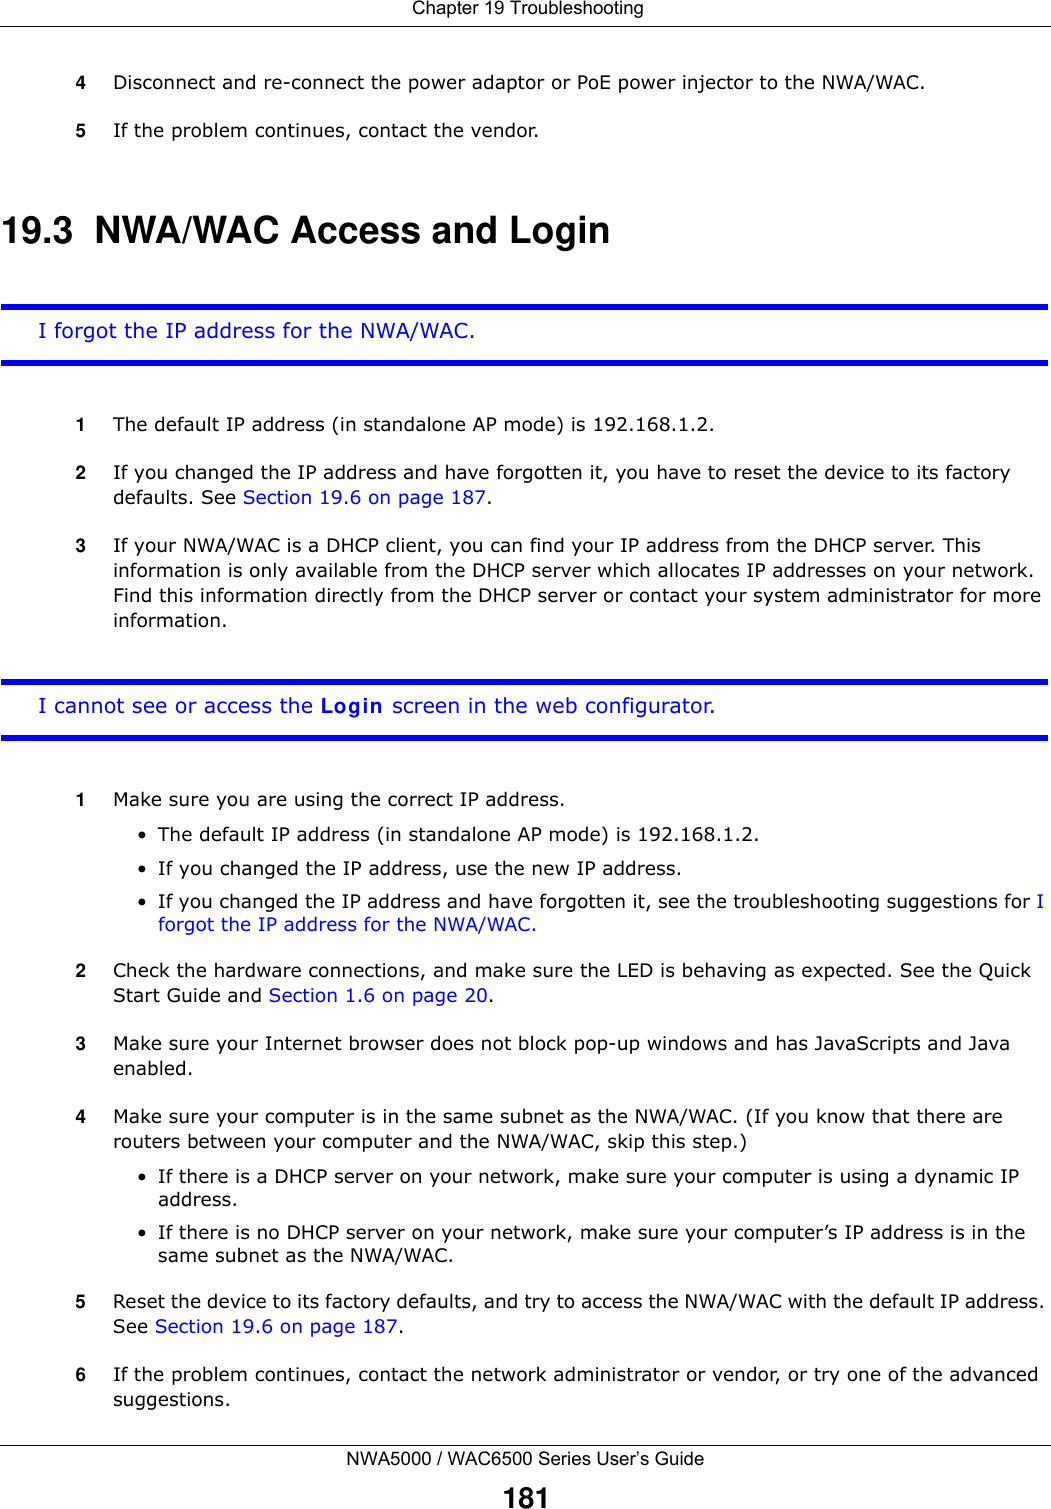  Chapter 19 TroubleshootingNWA5000 / WAC6500 Series User’s Guide1814Disconnect and re-connect the power adaptor or PoE power injector to the NWA/WAC. 5If the problem continues, contact the vendor.19.3  NWA/WAC Access and LoginI forgot the IP address for the NWA/WAC.1The default IP address (in standalone AP mode) is 192.168.1.2.2If you changed the IP address and have forgotten it, you have to reset the device to its factory defaults. See Section 19.6 on page 187.3If your NWA/WAC is a DHCP client, you can find your IP address from the DHCP server. This information is only available from the DHCP server which allocates IP addresses on your network. Find this information directly from the DHCP server or contact your system administrator for more information.I cannot see or access the Login screen in the web configurator.1Make sure you are using the correct IP address.• The default IP address (in standalone AP mode) is 192.168.1.2.• If you changed the IP address, use the new IP address.• If you changed the IP address and have forgotten it, see the troubleshooting suggestions for I forgot the IP address for the NWA/WAC.2Check the hardware connections, and make sure the LED is behaving as expected. See the Quick Start Guide and Section 1.6 on page 20.3Make sure your Internet browser does not block pop-up windows and has JavaScripts and Java enabled.4Make sure your computer is in the same subnet as the NWA/WAC. (If you know that there are routers between your computer and the NWA/WAC, skip this step.) • If there is a DHCP server on your network, make sure your computer is using a dynamic IP address.• If there is no DHCP server on your network, make sure your computer’s IP address is in the same subnet as the NWA/WAC.5Reset the device to its factory defaults, and try to access the NWA/WAC with the default IP address. See Section 19.6 on page 187. 6If the problem continues, contact the network administrator or vendor, or try one of the advanced suggestions.